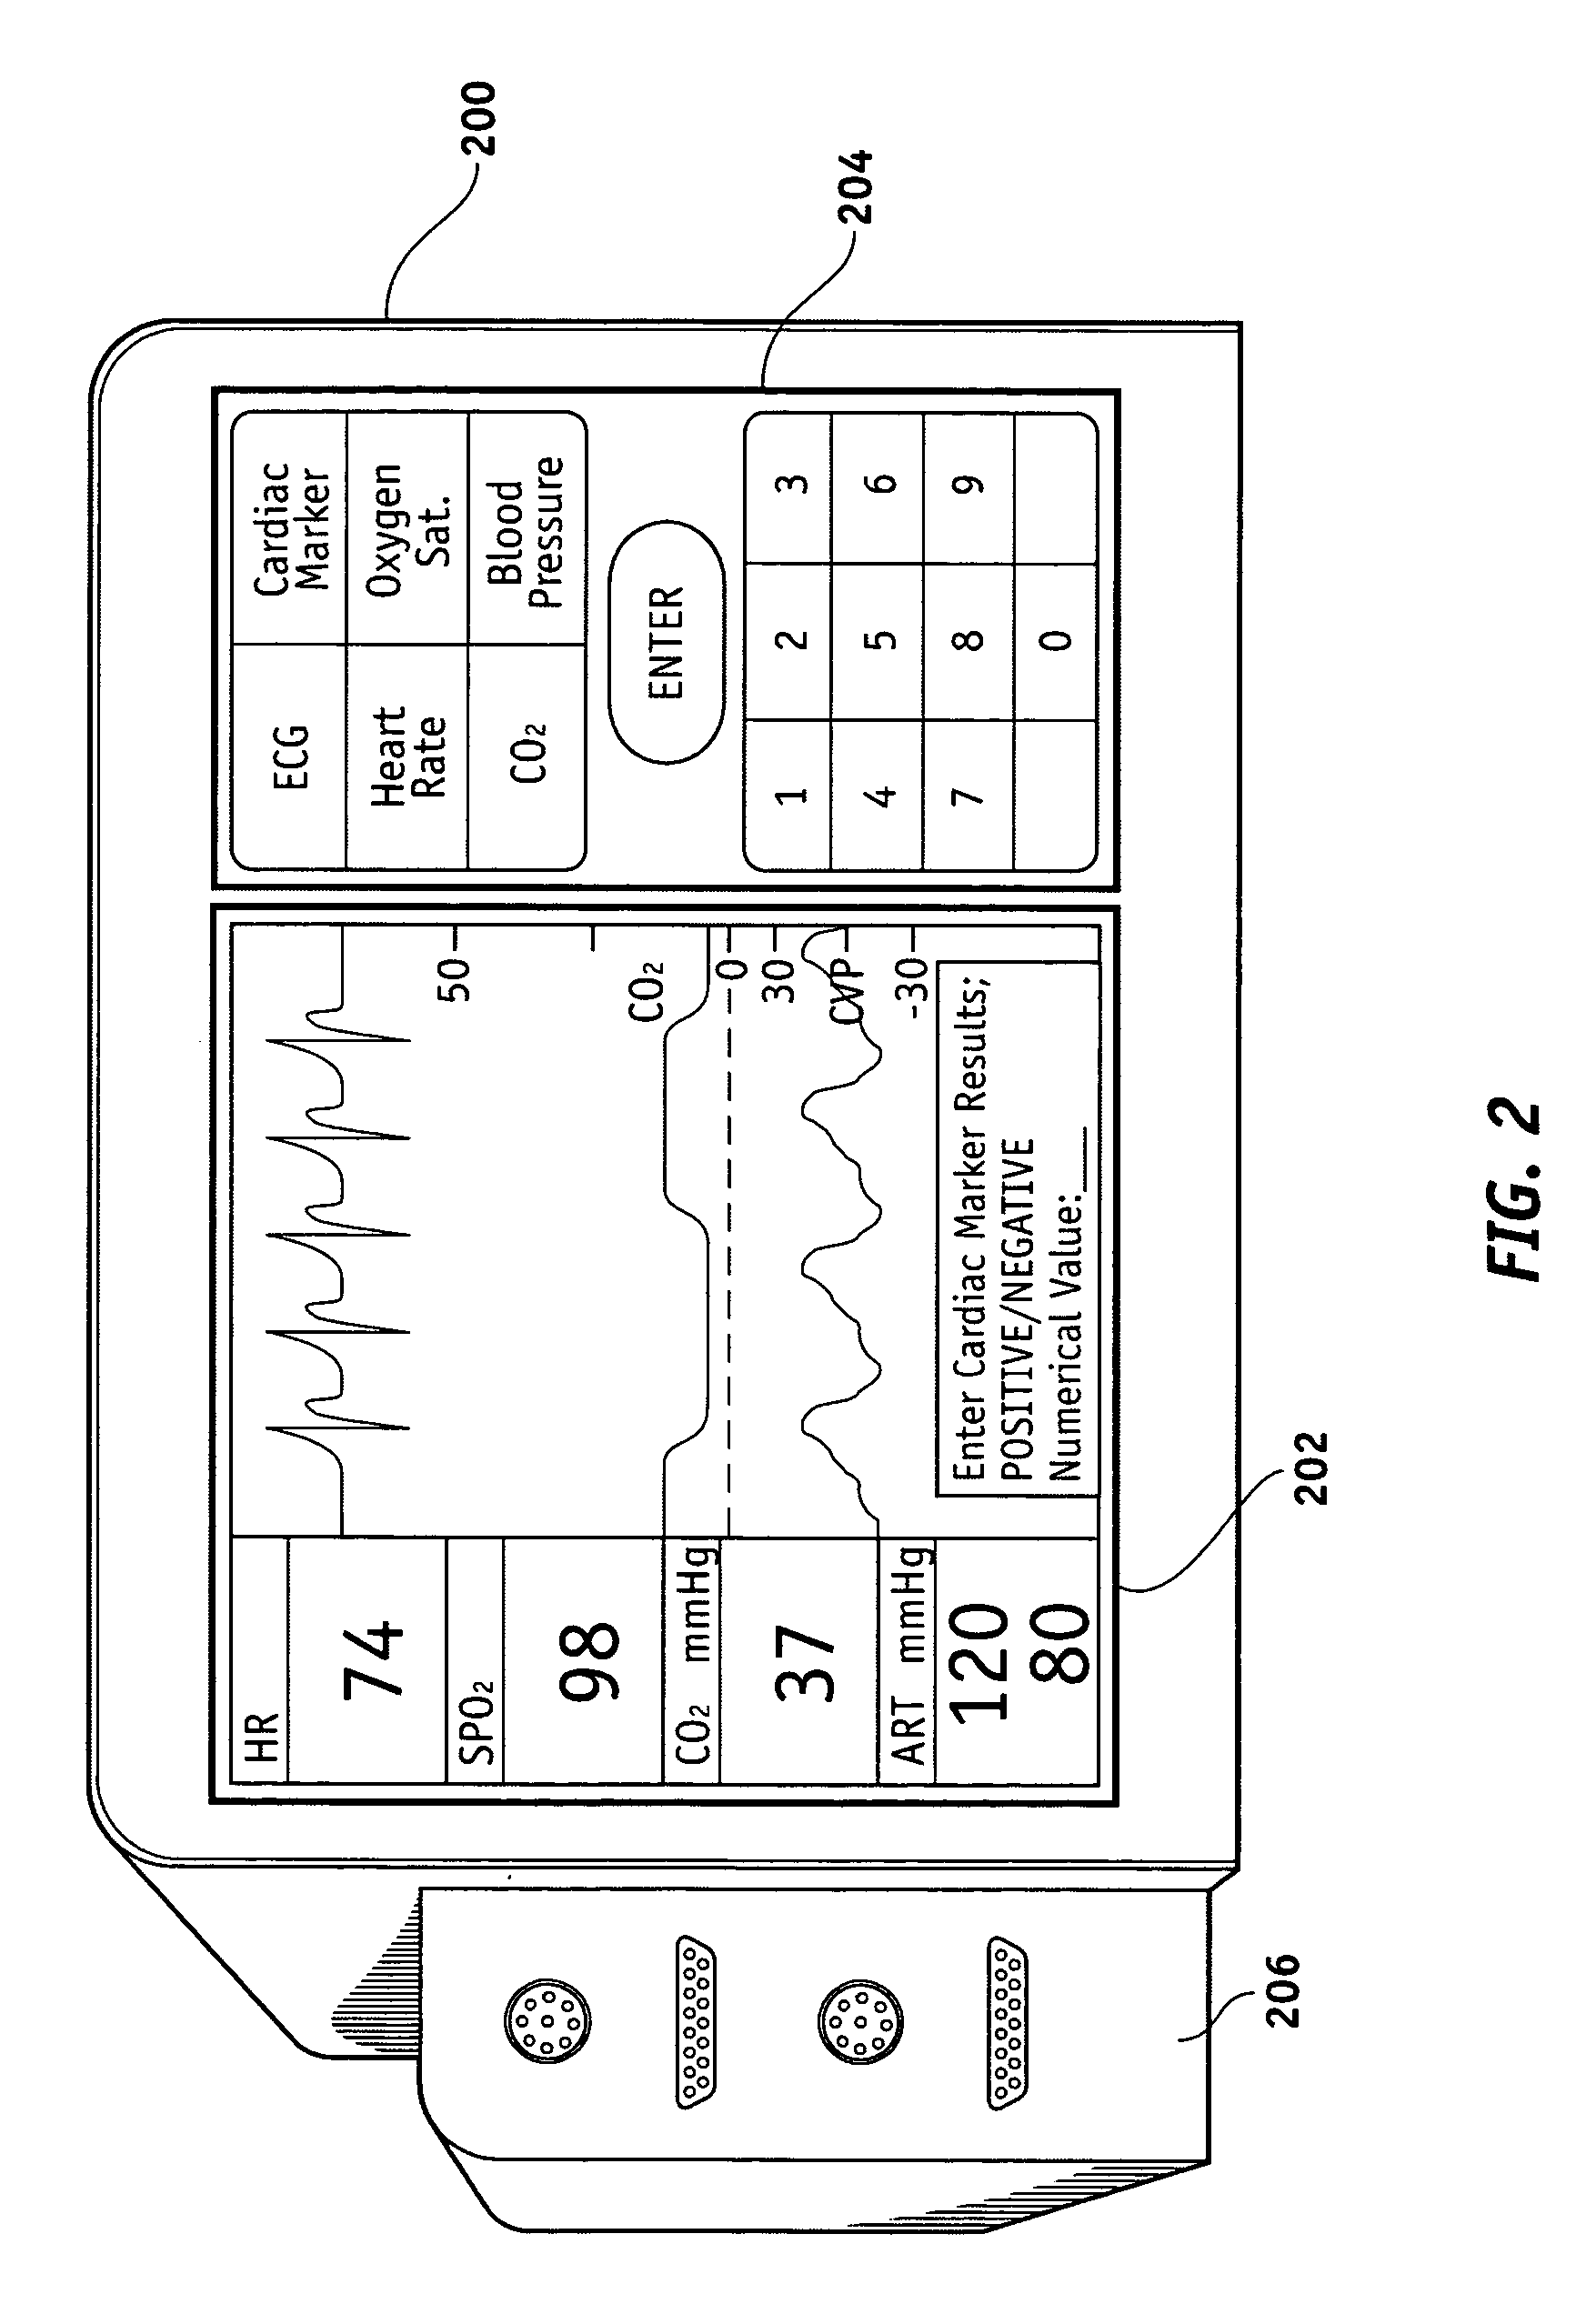 Apparatus and methods for documenting myocardial ischemia